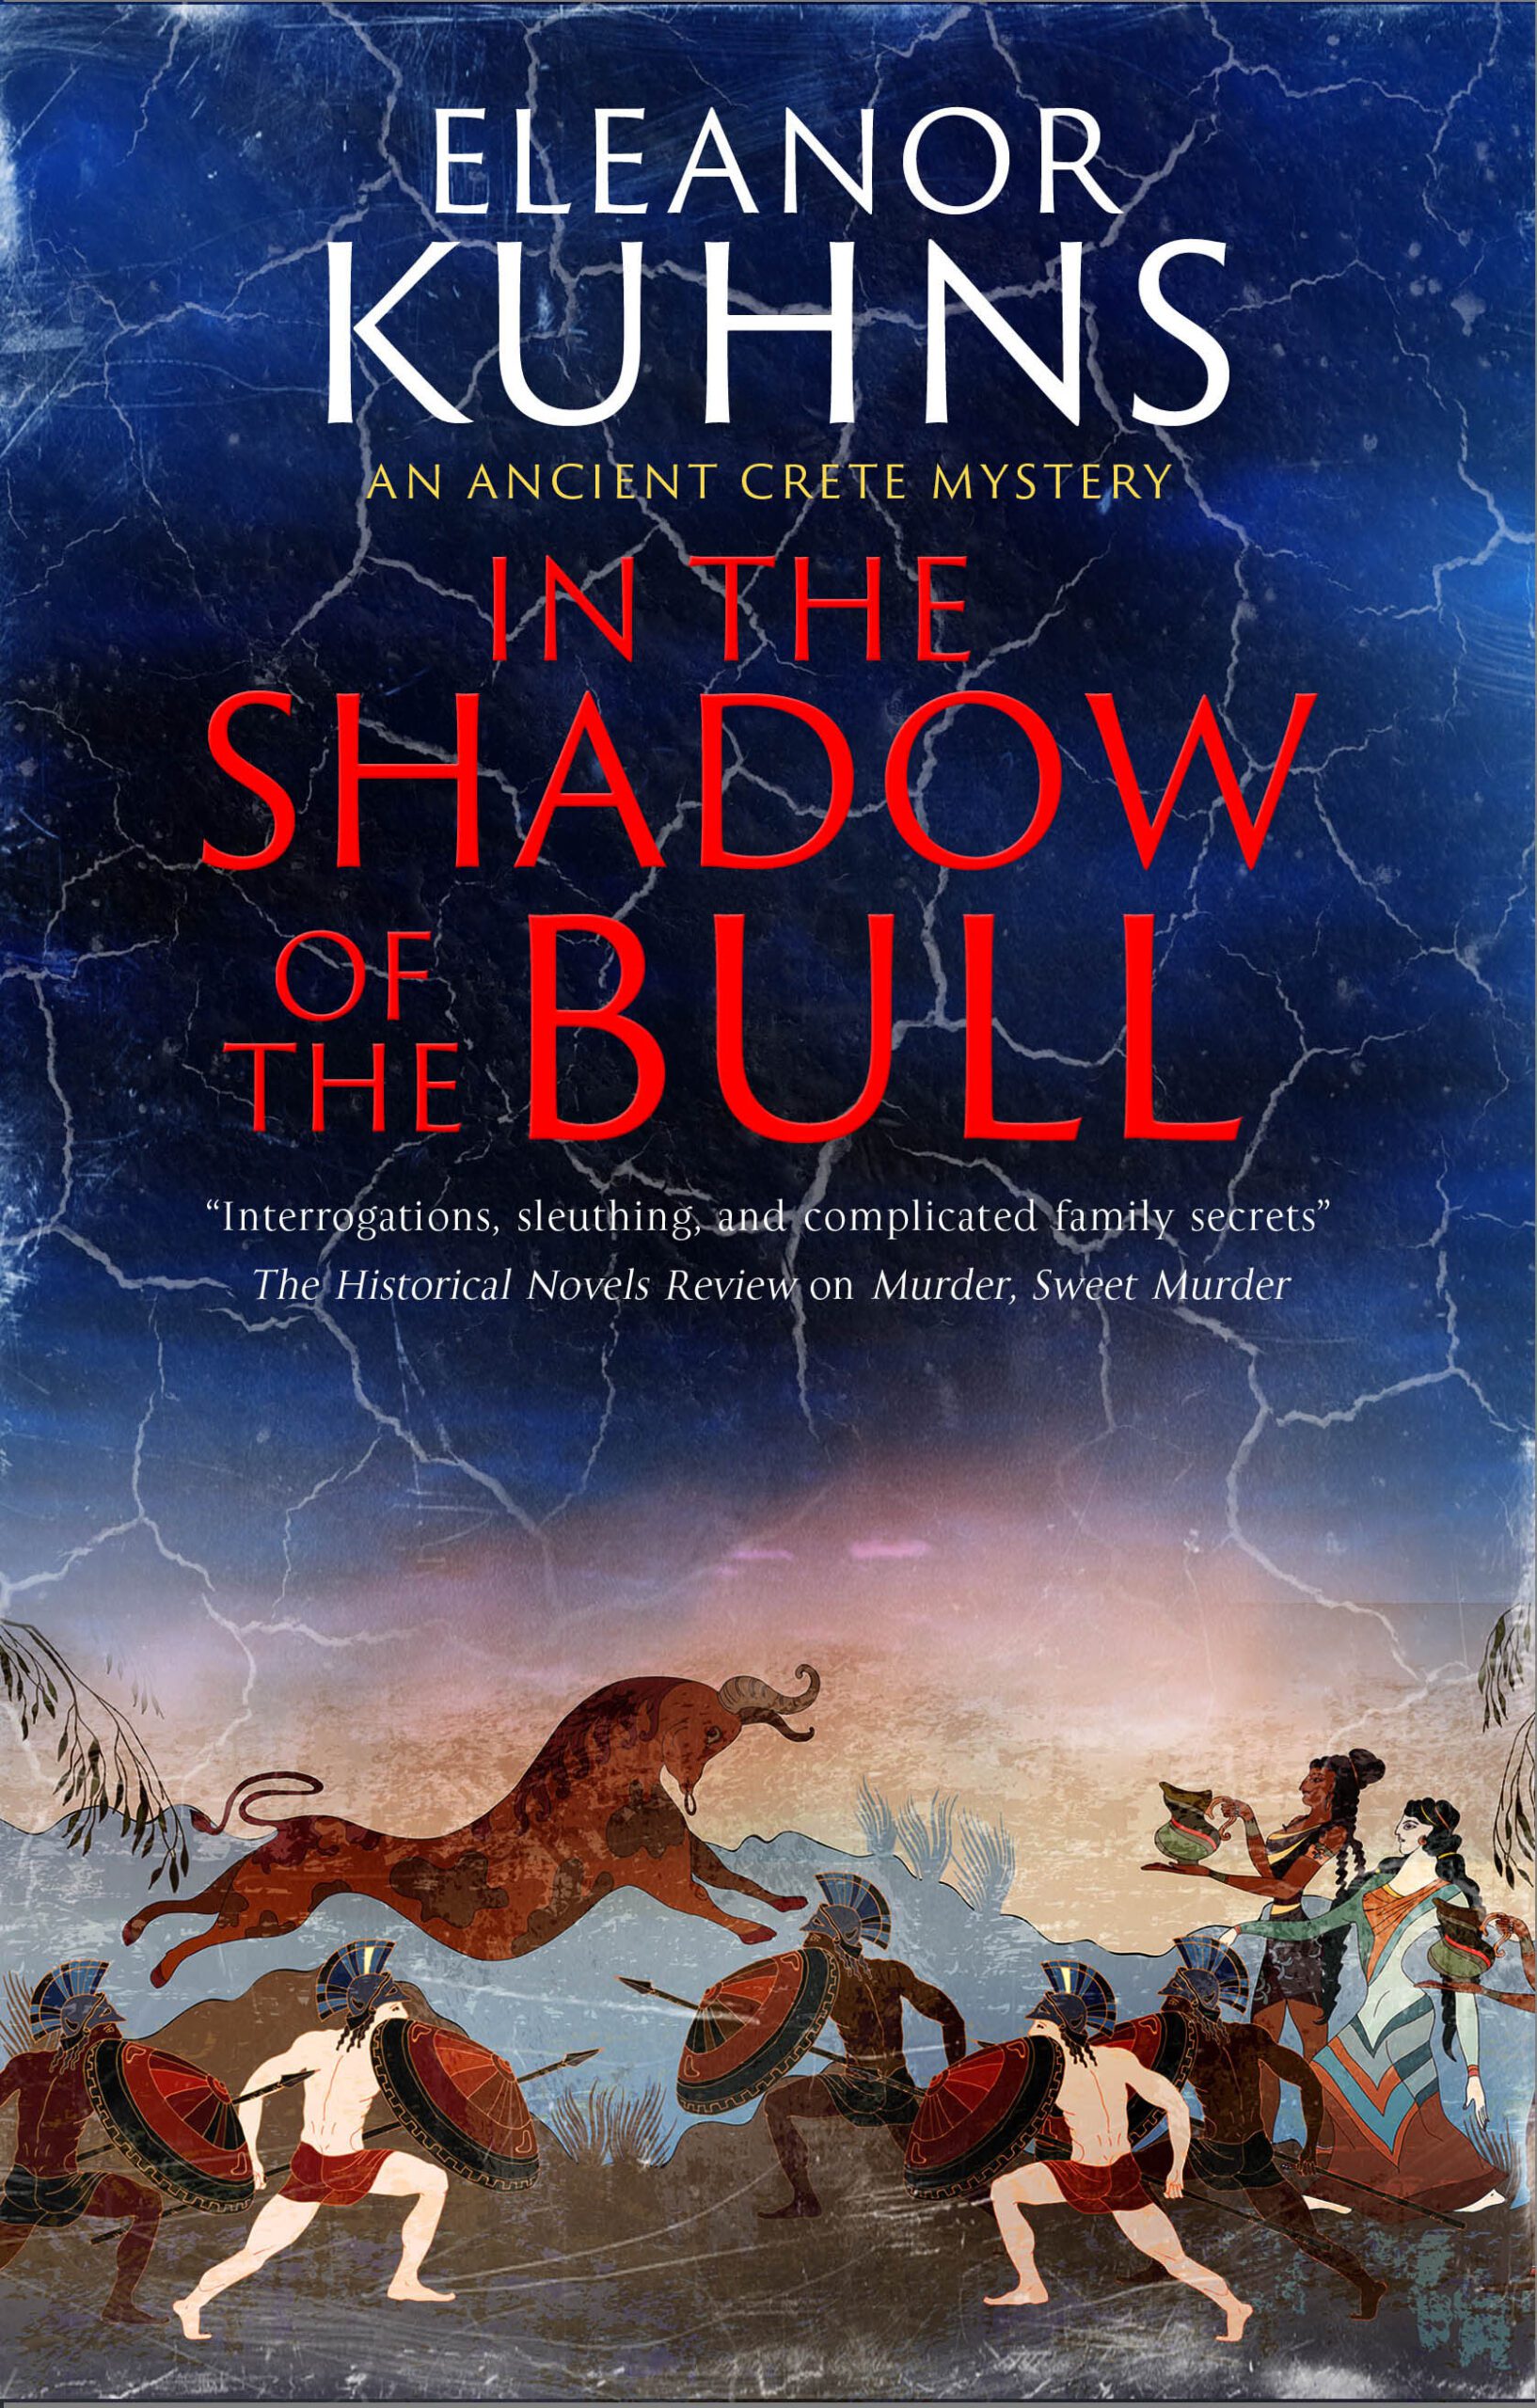 In the Shadow of the Bull by Eleanor Kuhns